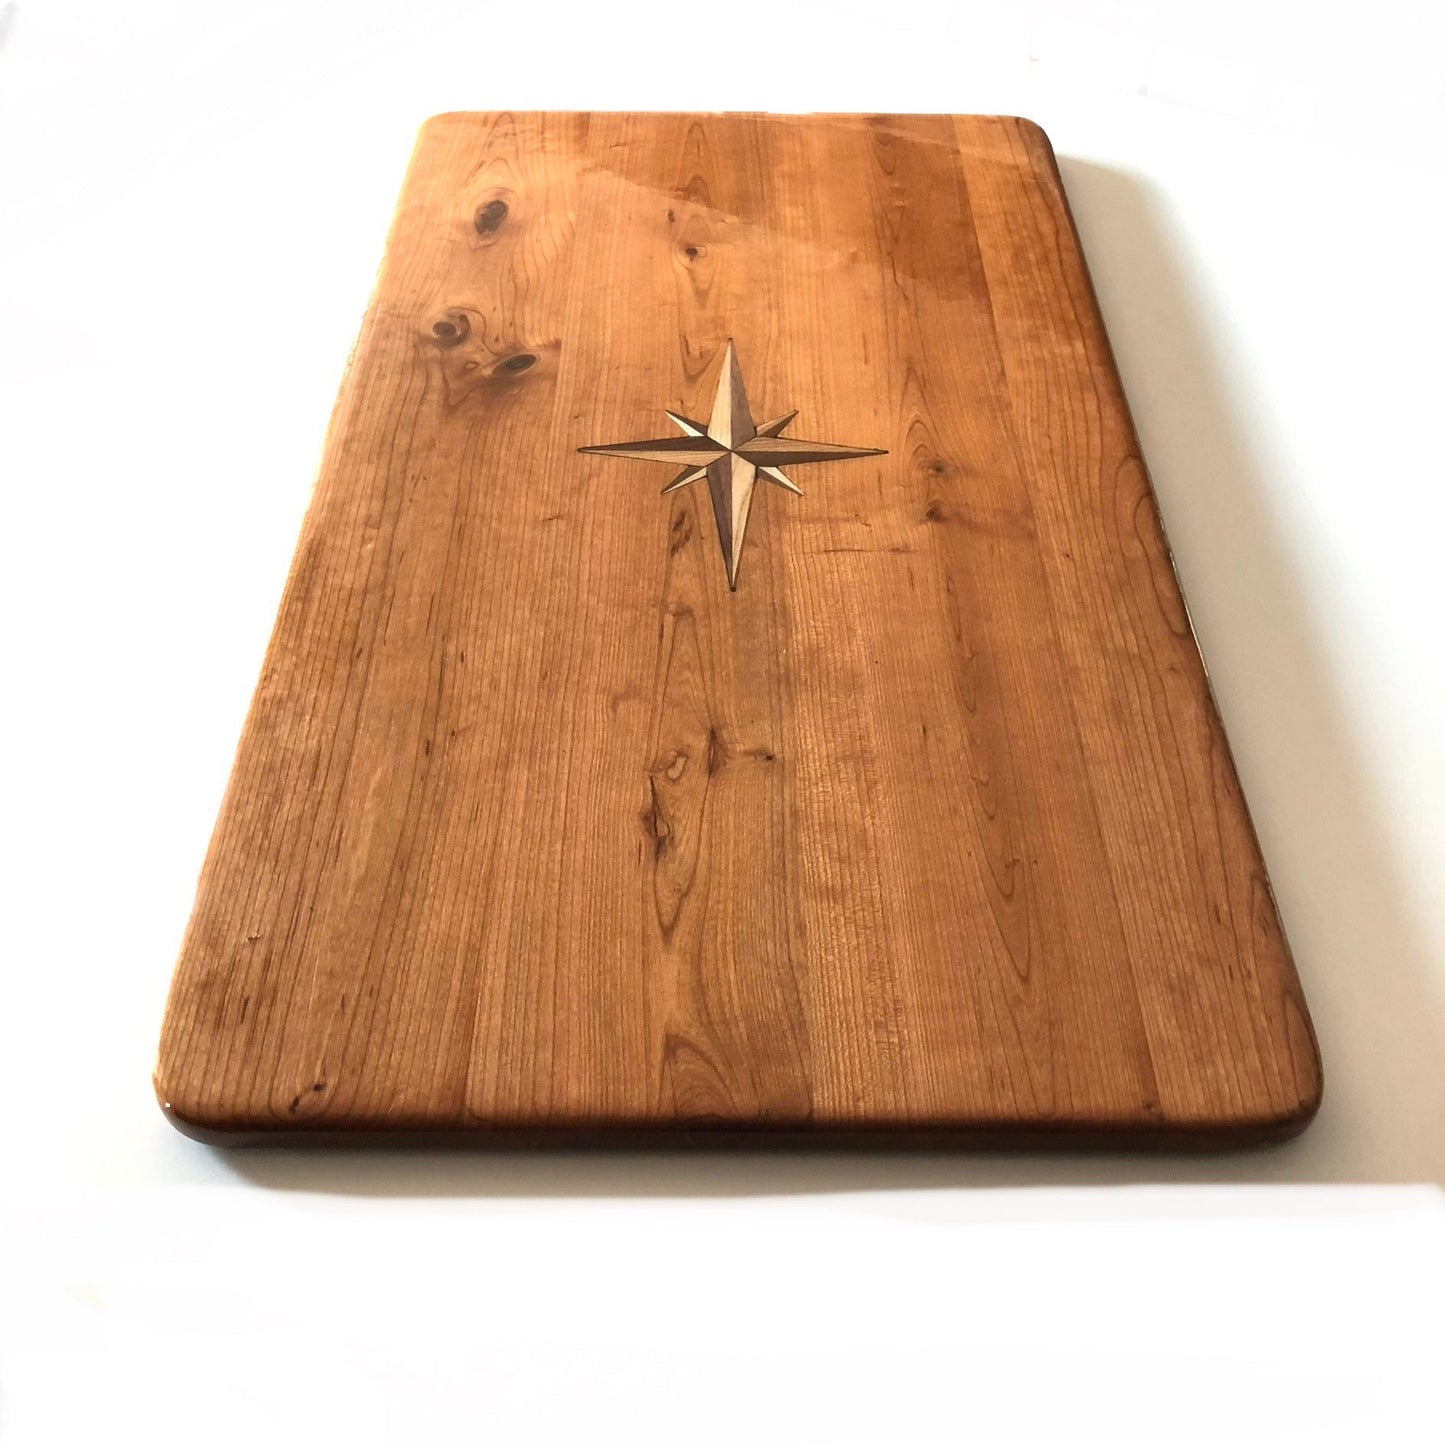 Cherry Boat Table with Walnut and Ash Compass Rose Inlay